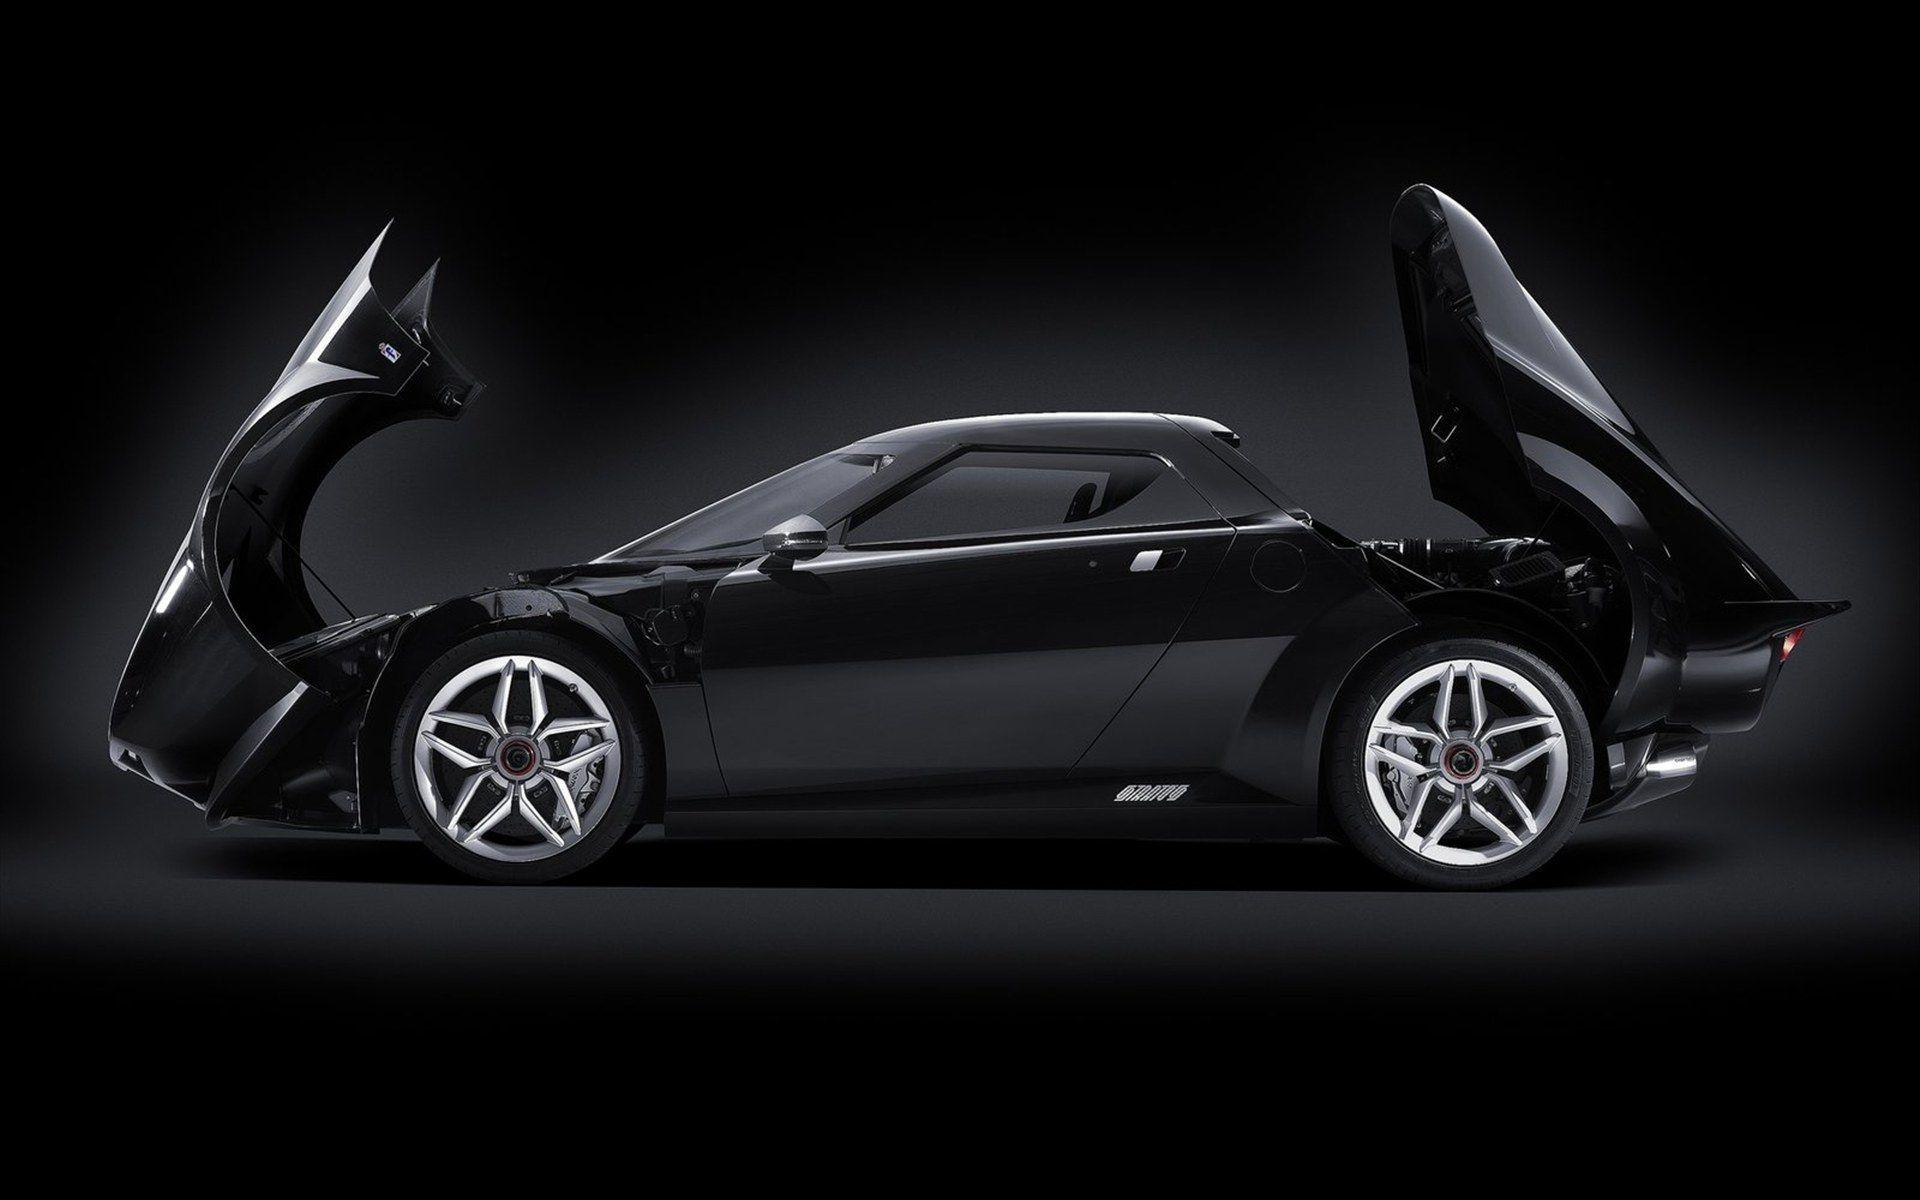 Lancia Stratos 2011 wallpaper and image, picture